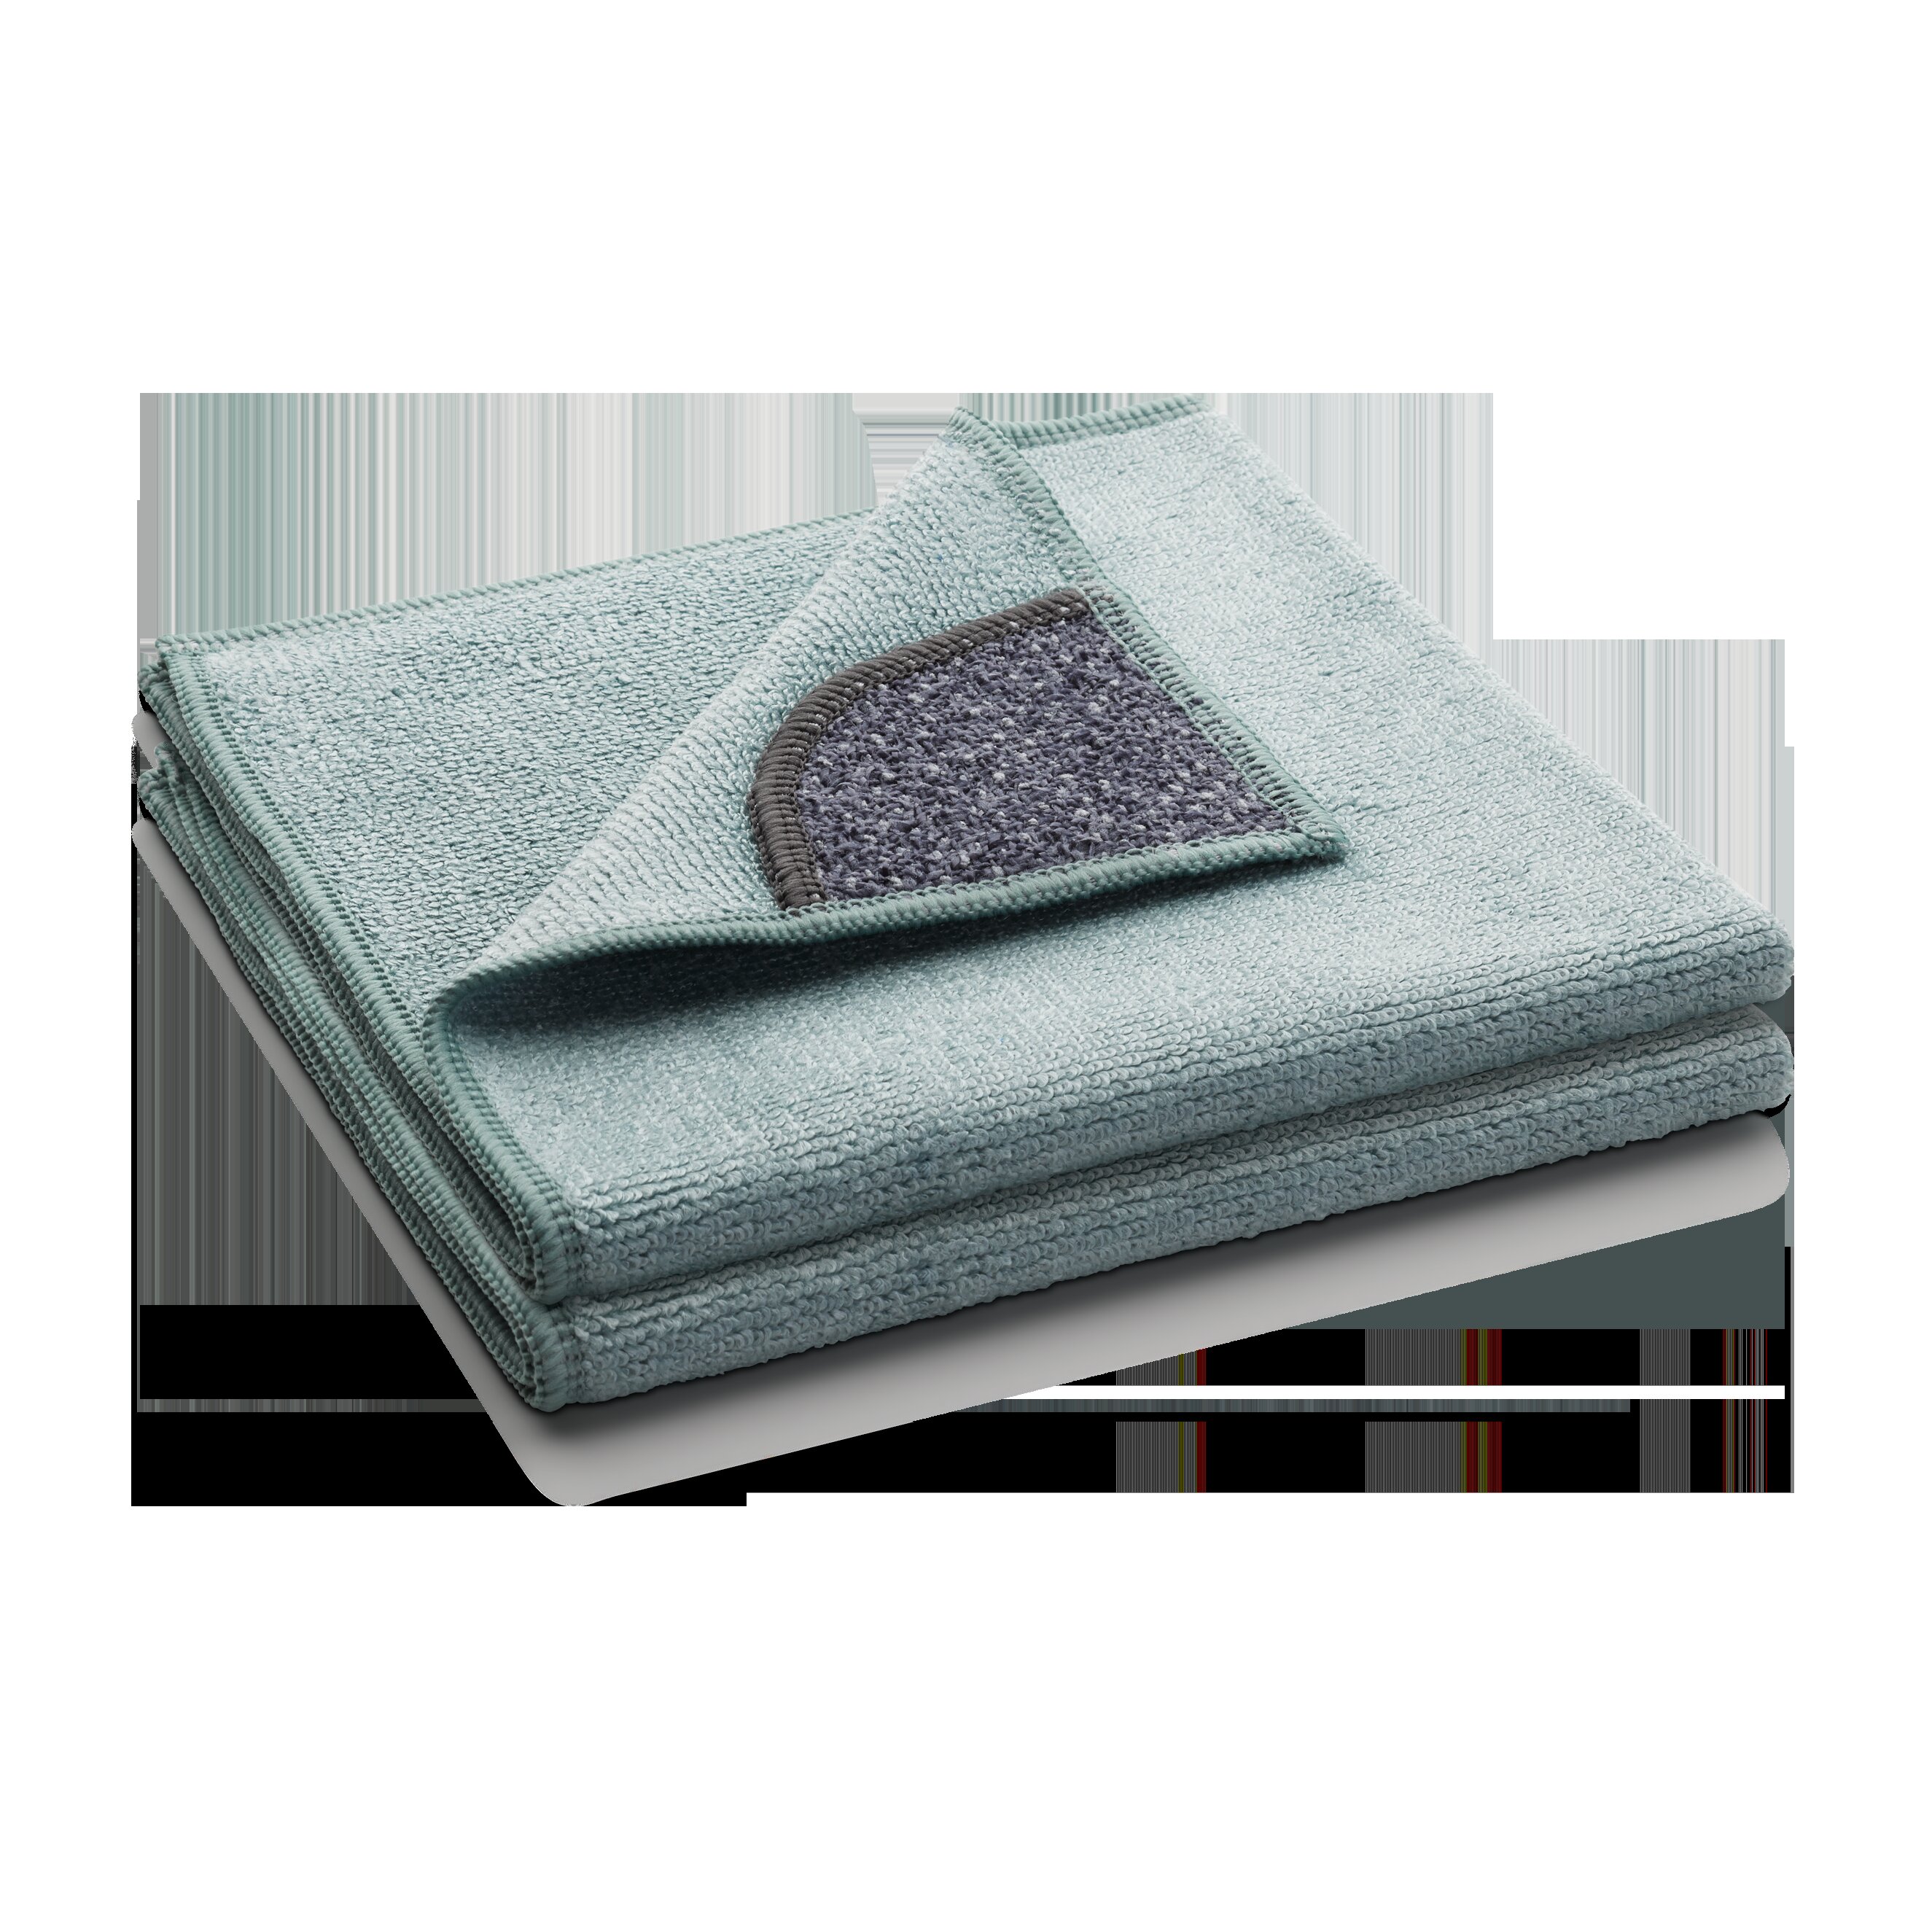 E-Cloth General Purpose Cleaning Cloth, Premium Microfiber Cleaning Cloth, Ideal for Kitchen, Countertops, Sinks, and Bathrooms 300 Wash Guarantee